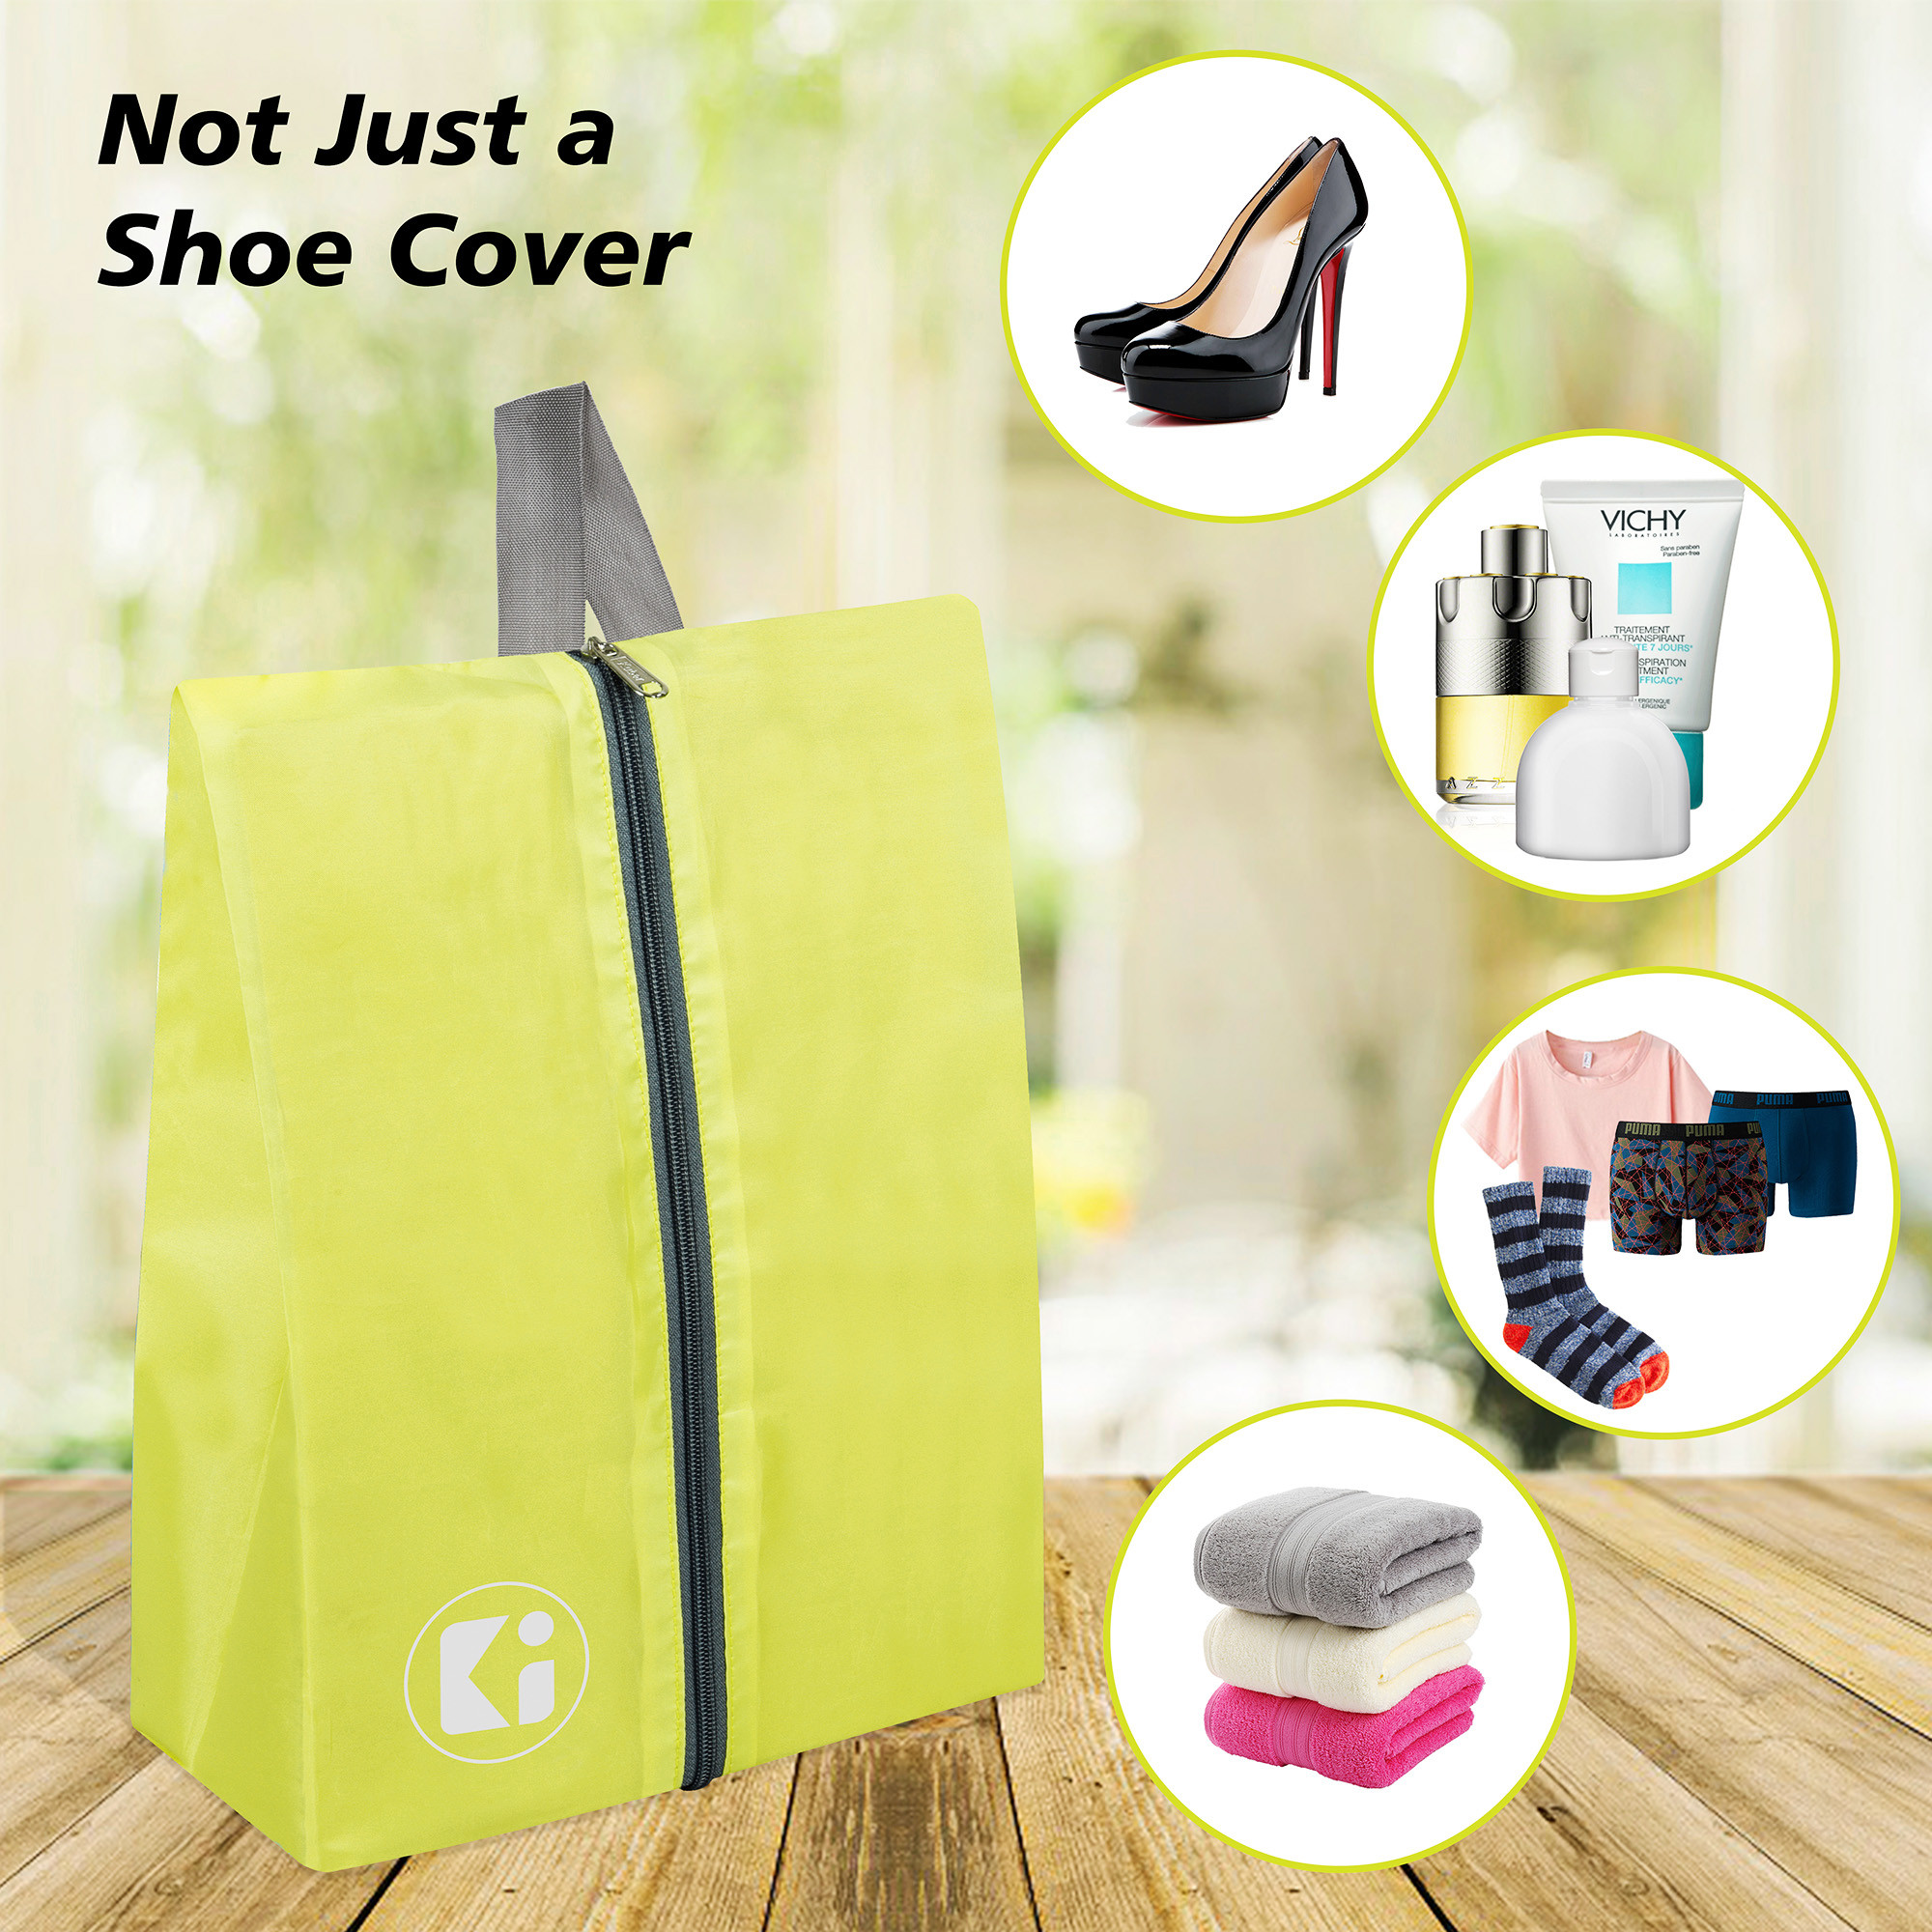 Kuber Industries Travel Organizer | Travel Shoe Carrying Bag | Toiletry Pouch with Zipper | Shoe Cover for Travel-Hiking-Adventure | Multipurpose Storage Organizer Bag | Yellow